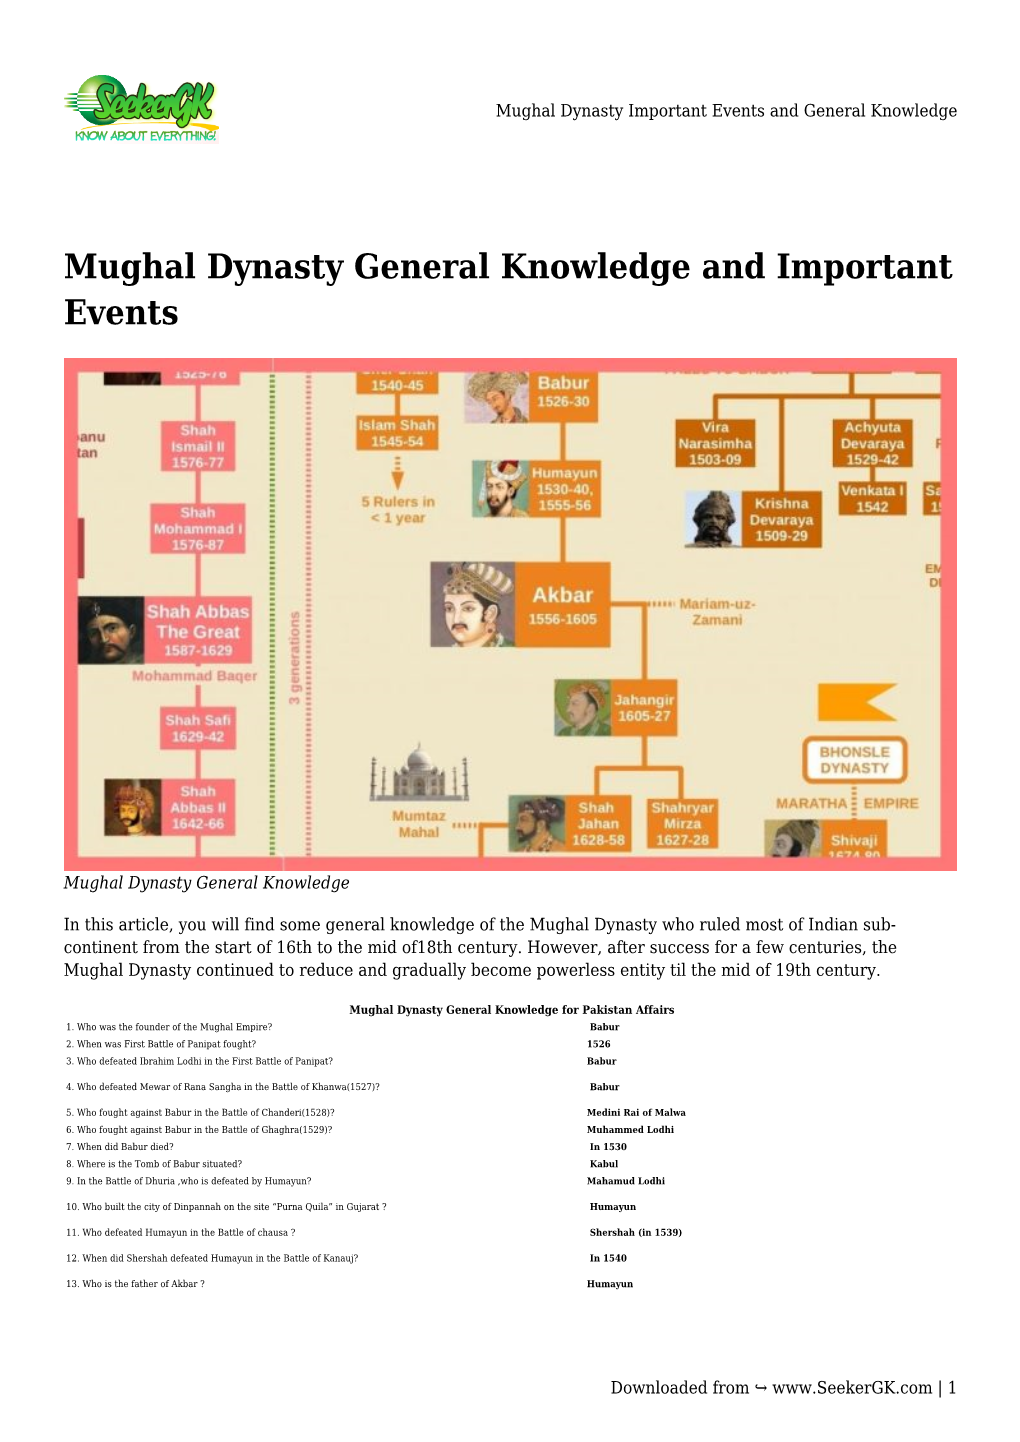 Mughal Dynasty Important Events and General Knowledge